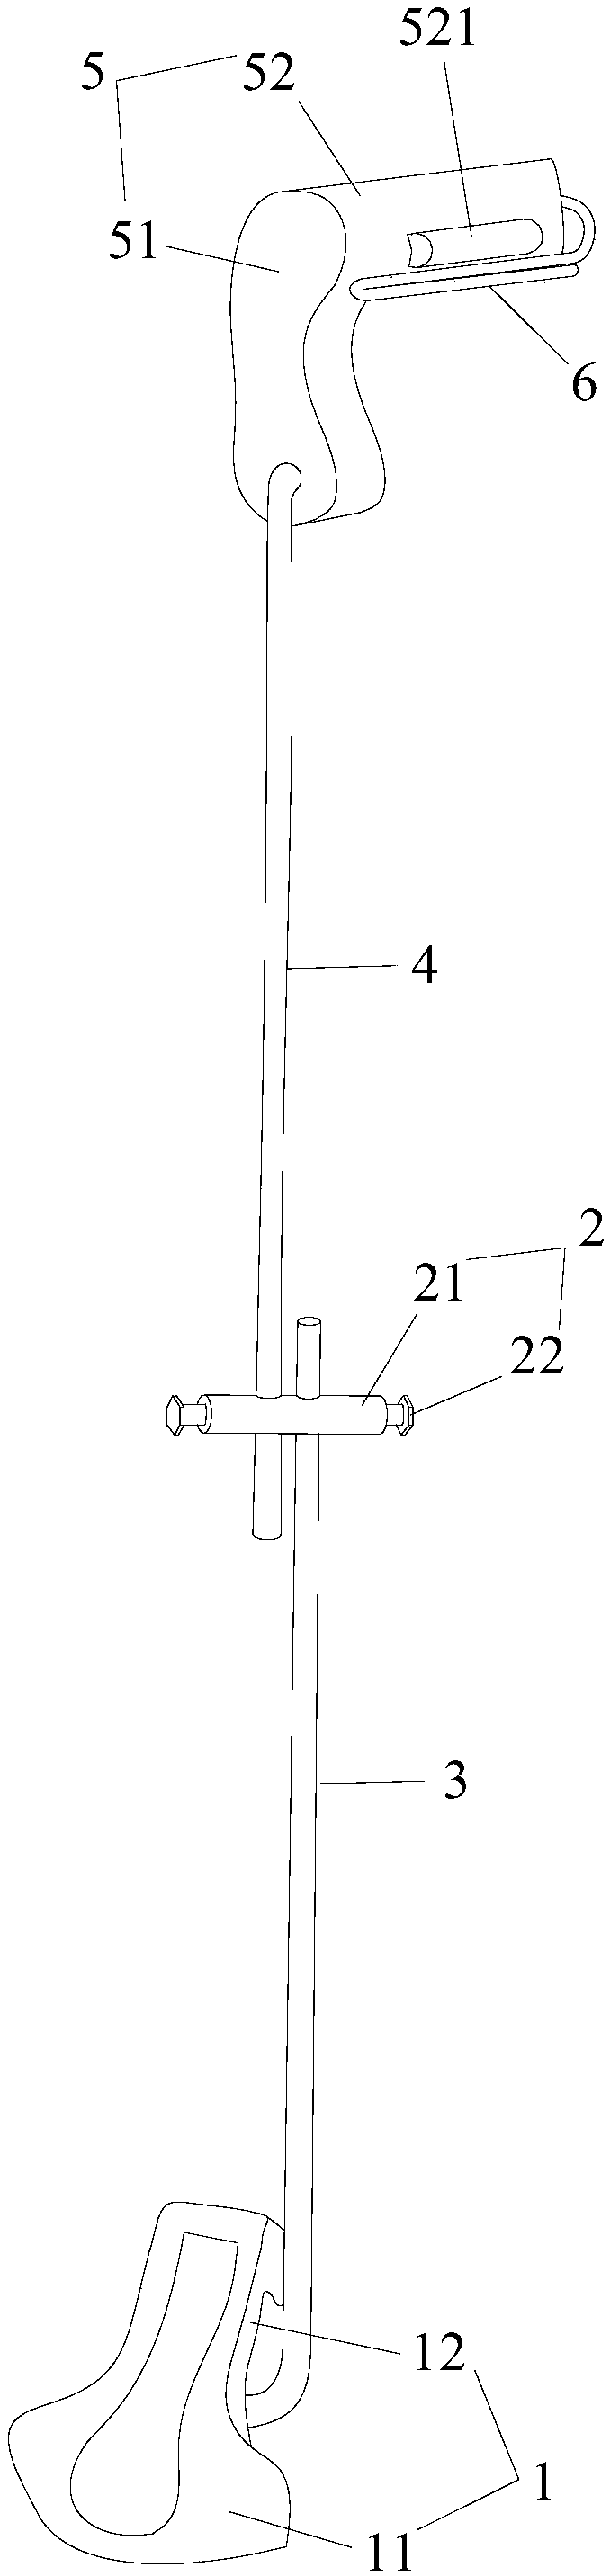 Braking structure of sweater sewing device